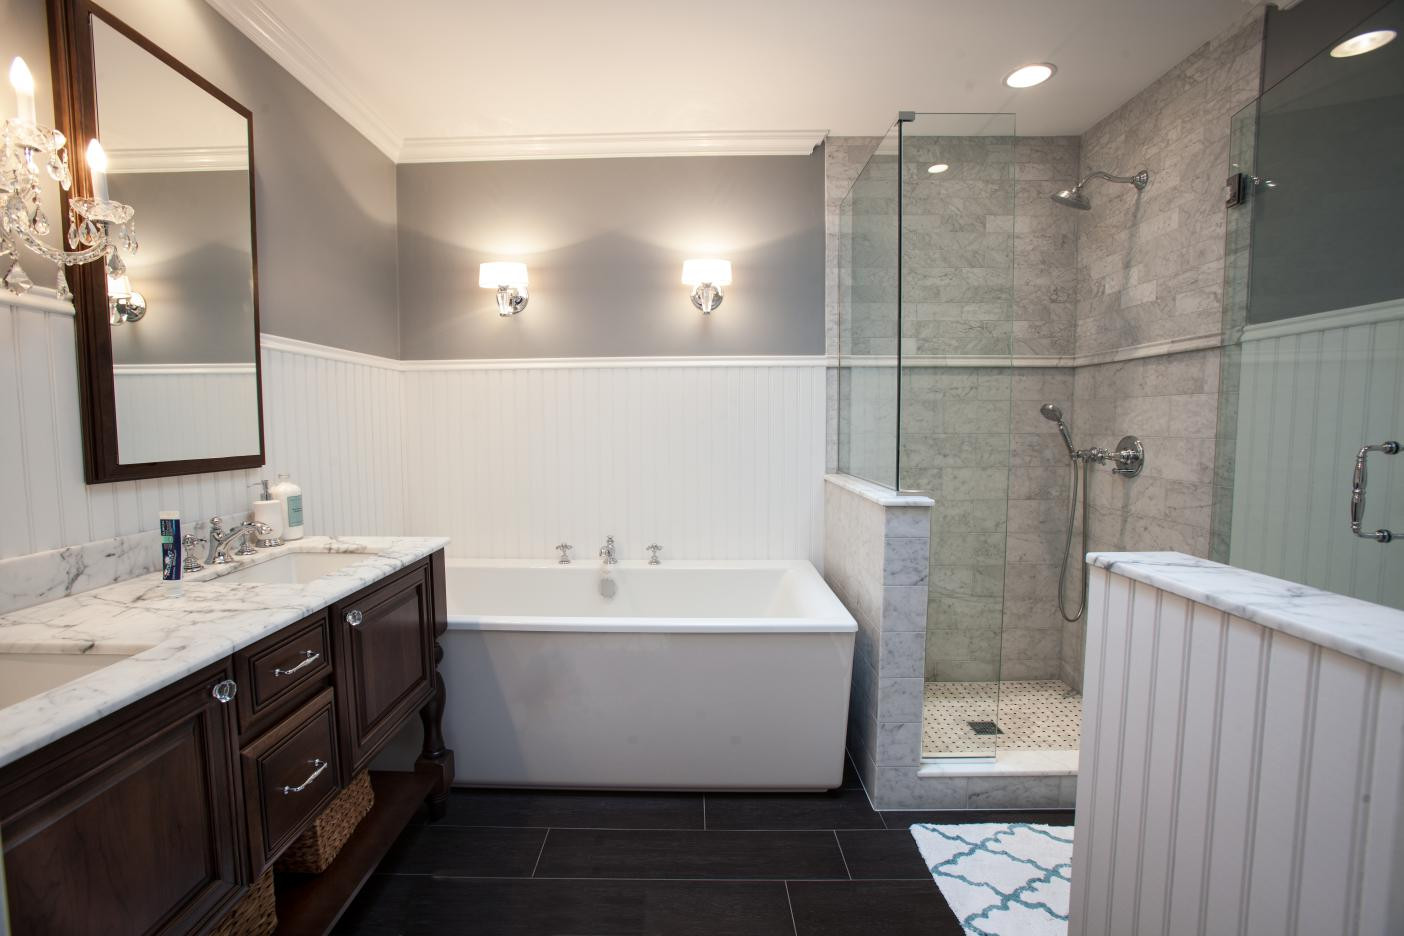 Bathroom Remodeling Chicago
 Chicago Bathroom Remodeling Get Your Dream Bath Today